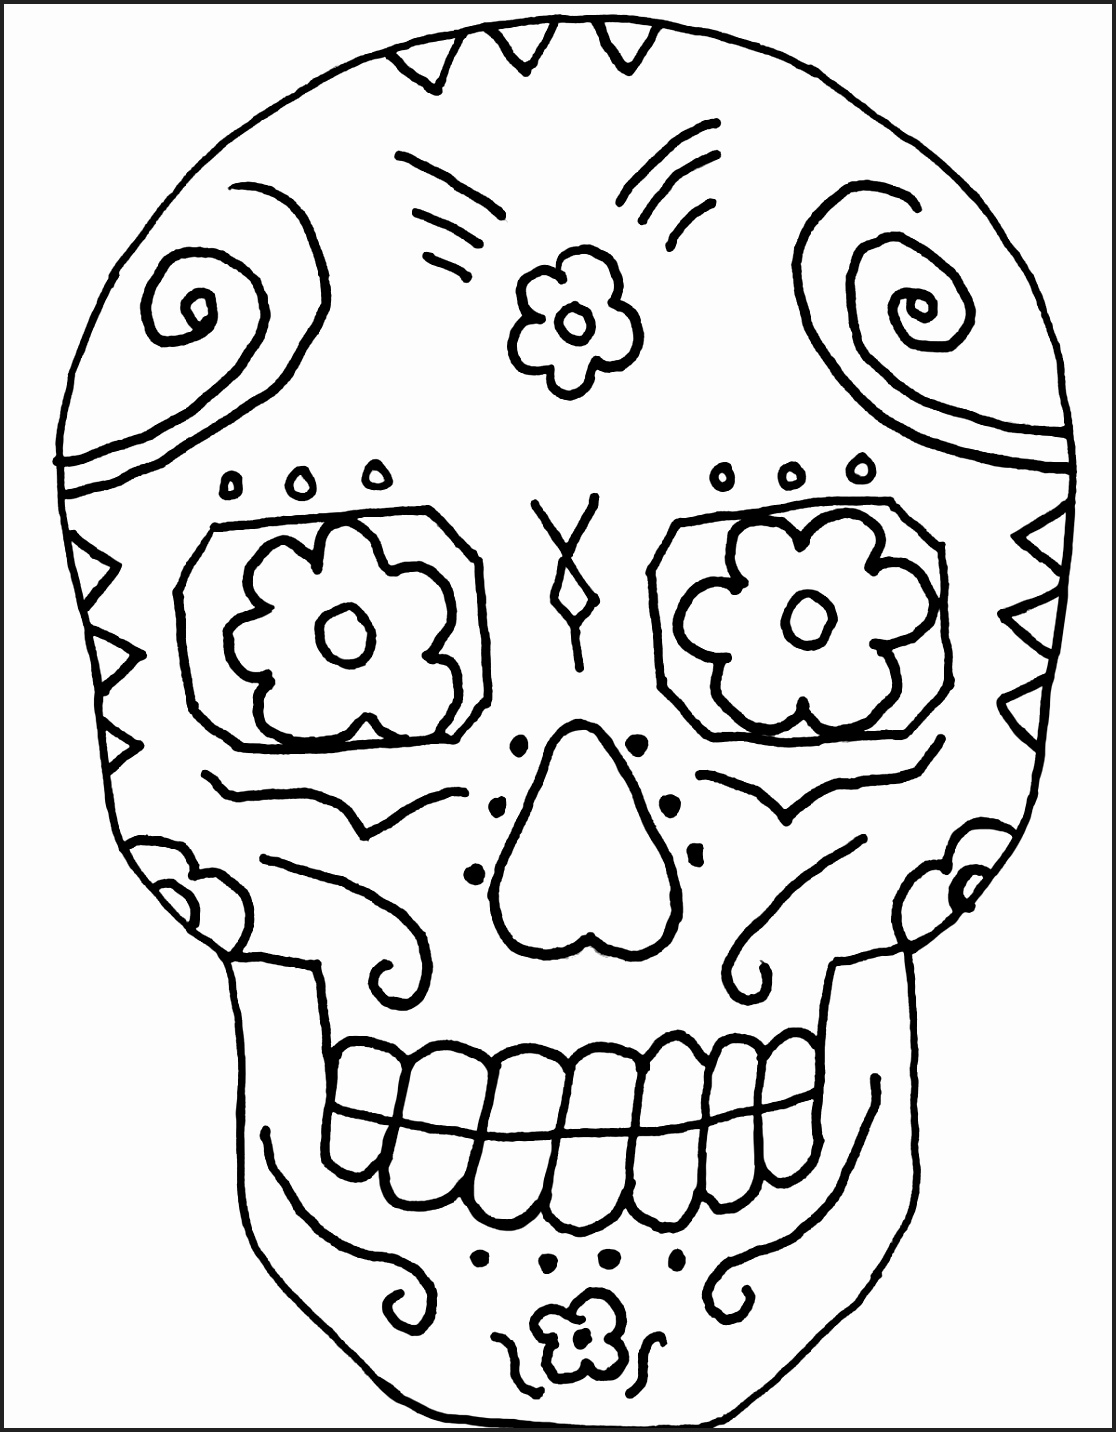 Mexican Sugar Skull Coloring Pages at GetDrawings | Free download